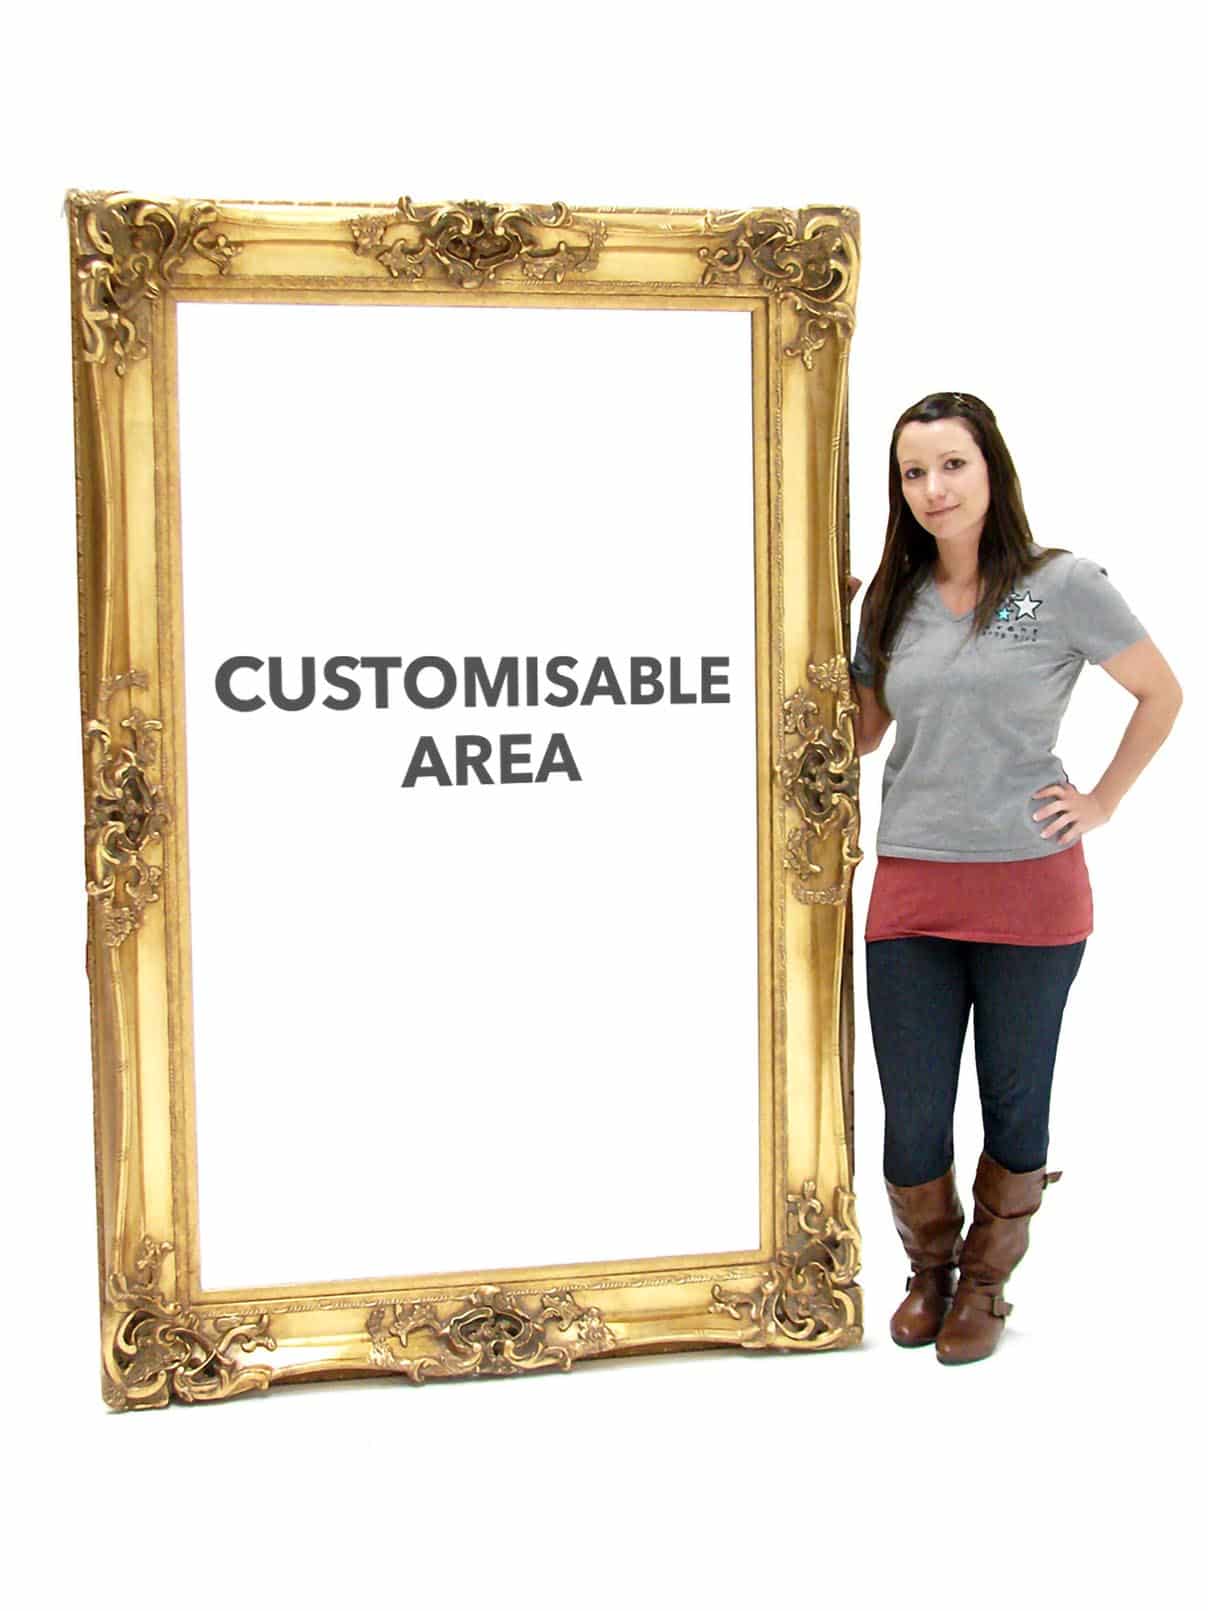 Giant Gold Frame #2  EPH Creative - Event Prop Hire